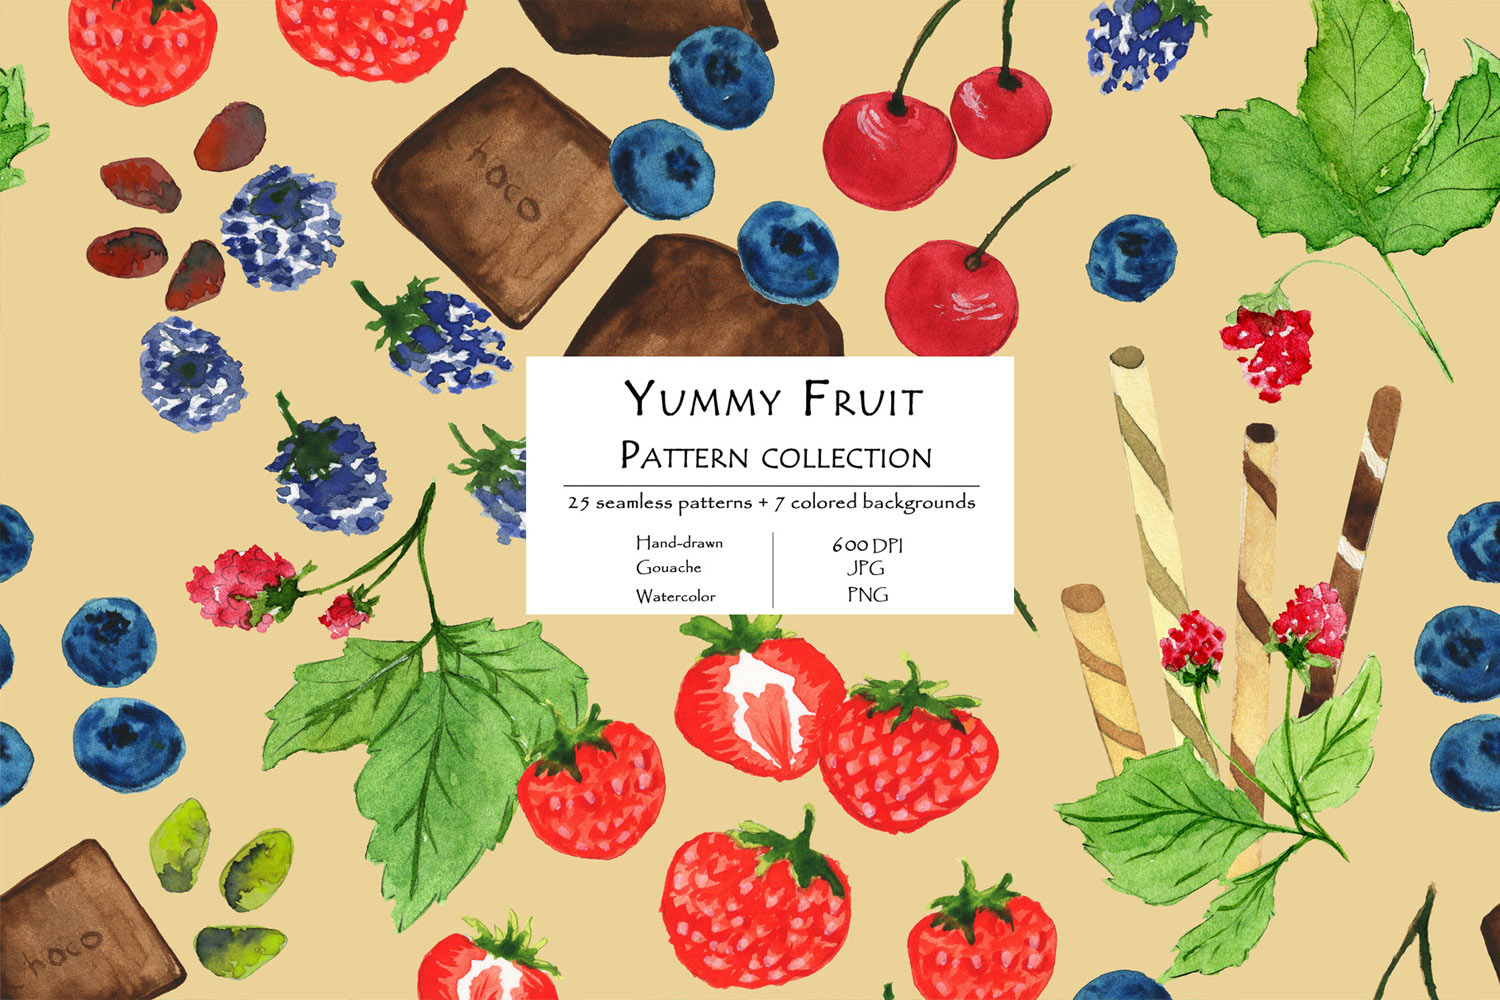 Yummy Fruit Pattern Collection With 25 Seamless Patterns And 7 Backgrounds Brown Background Example.